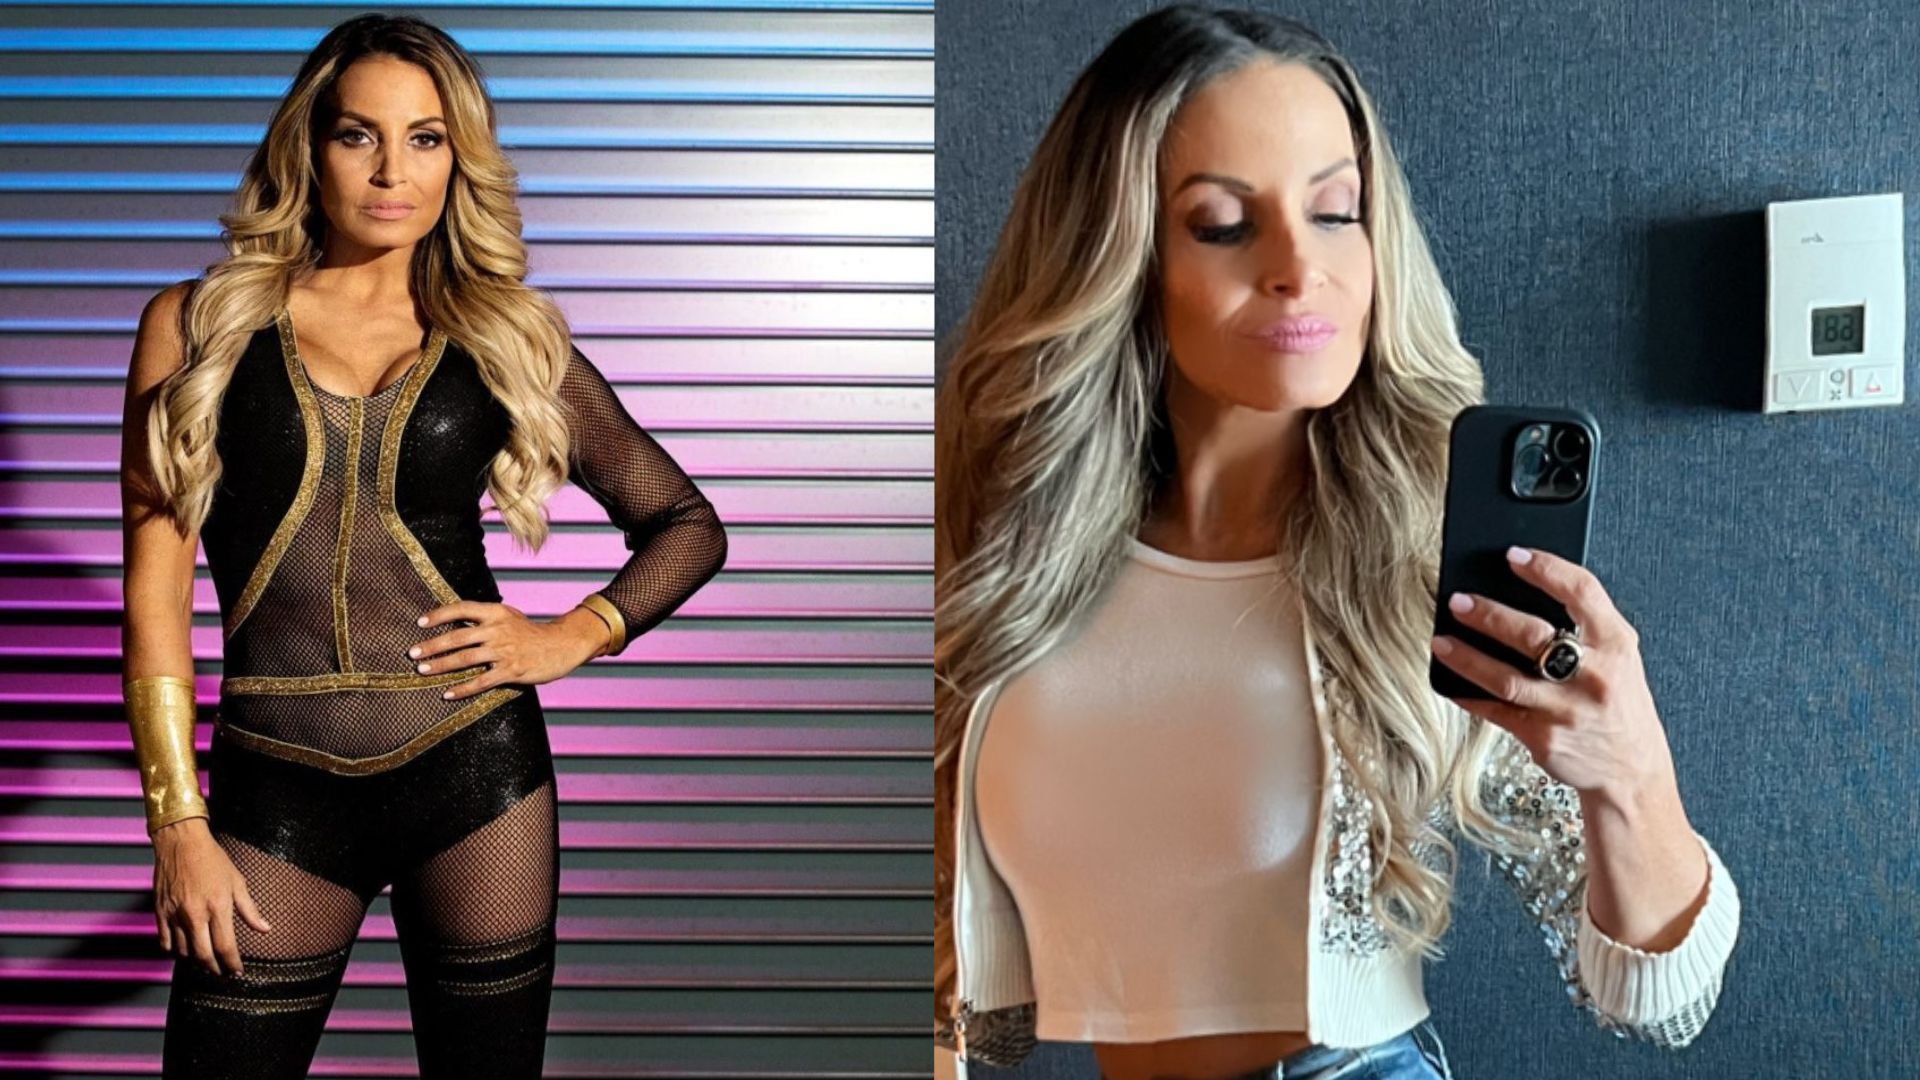 WWE Hall of Famer Trish Stratus is currently working on a &quot;secret project&quot;. Could this project be connected to a future in-ring return?